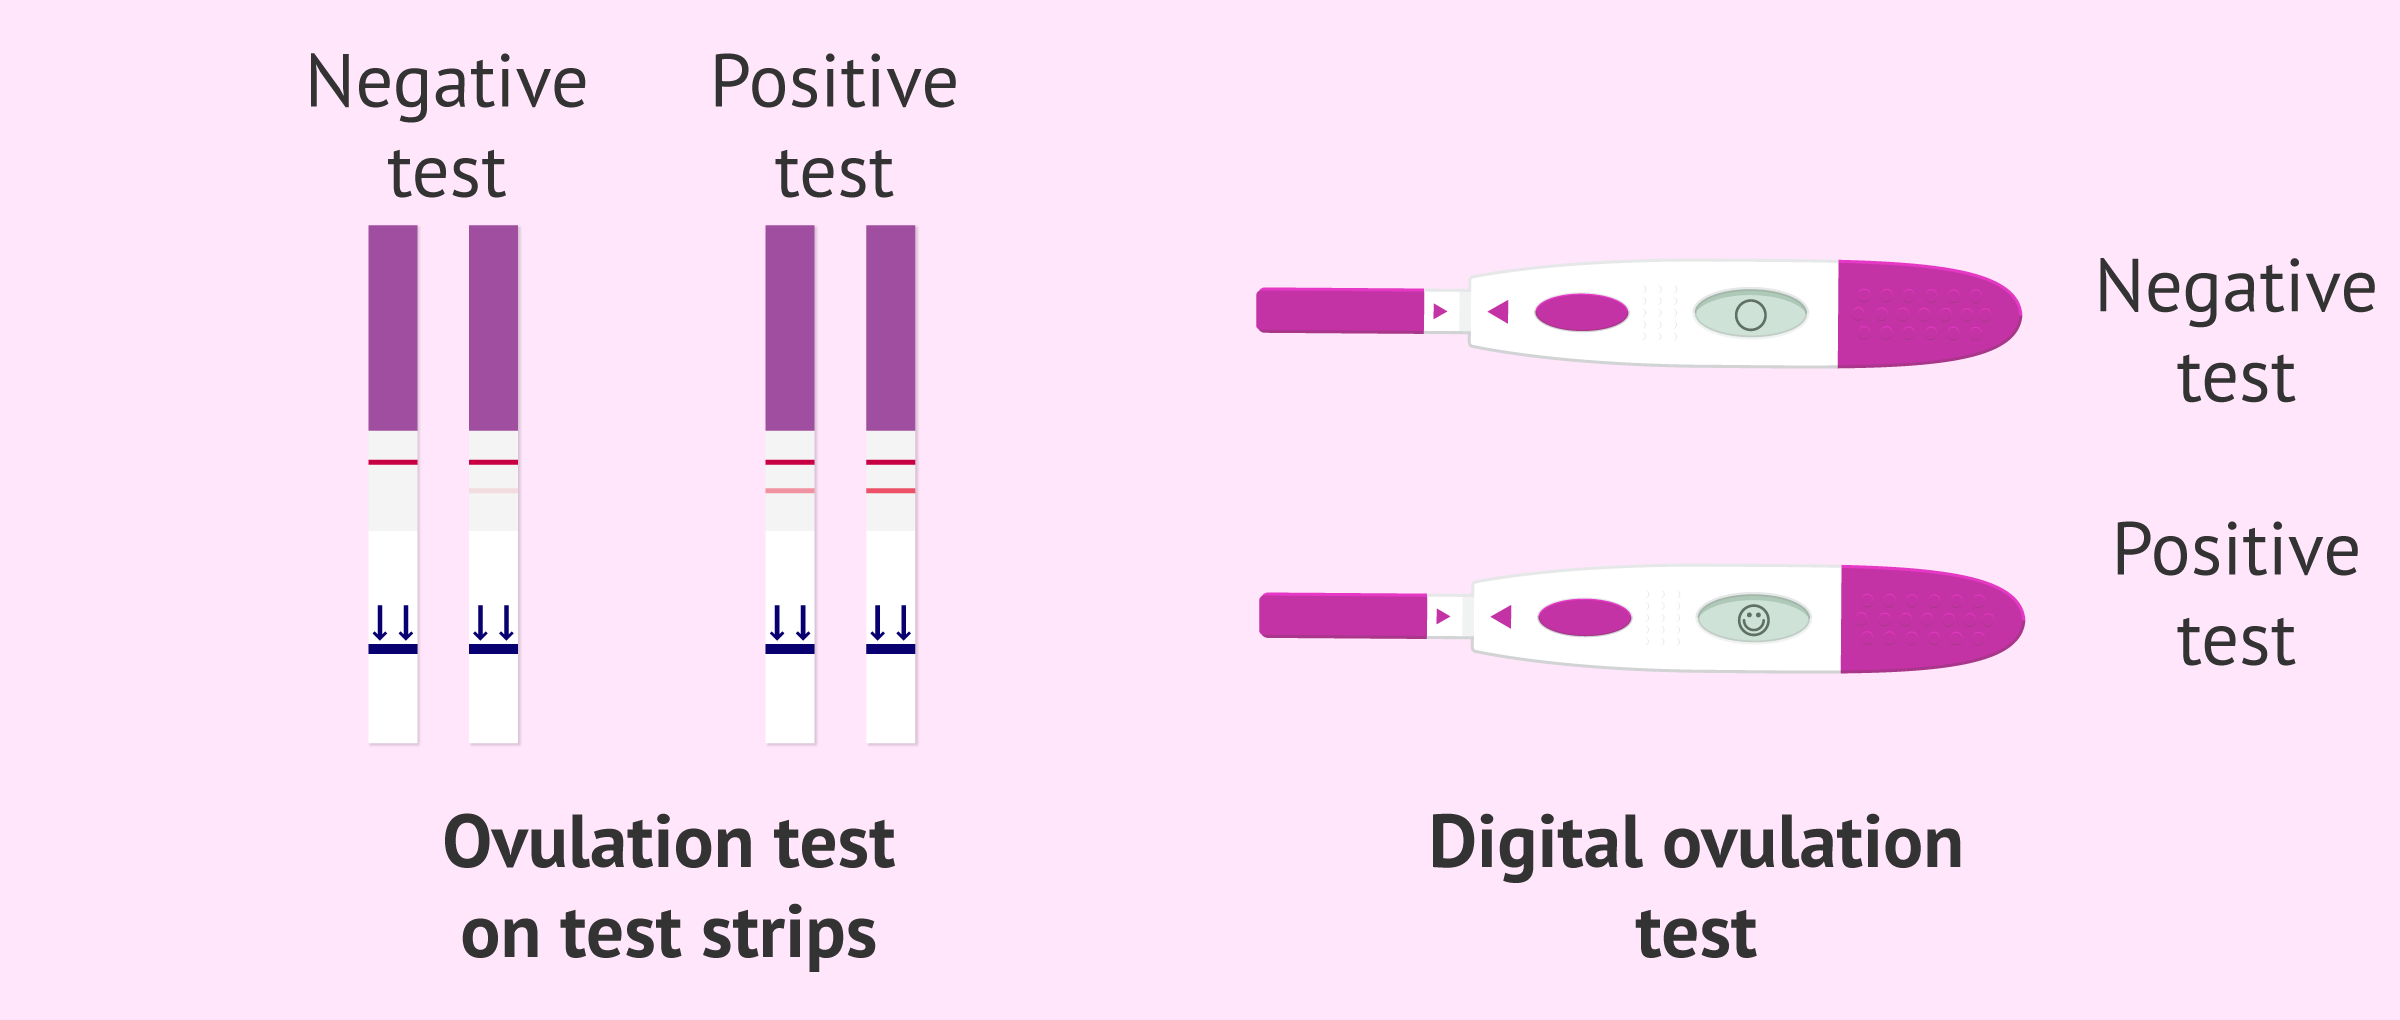 Ovulation tests – how do they work and what is their purpose?